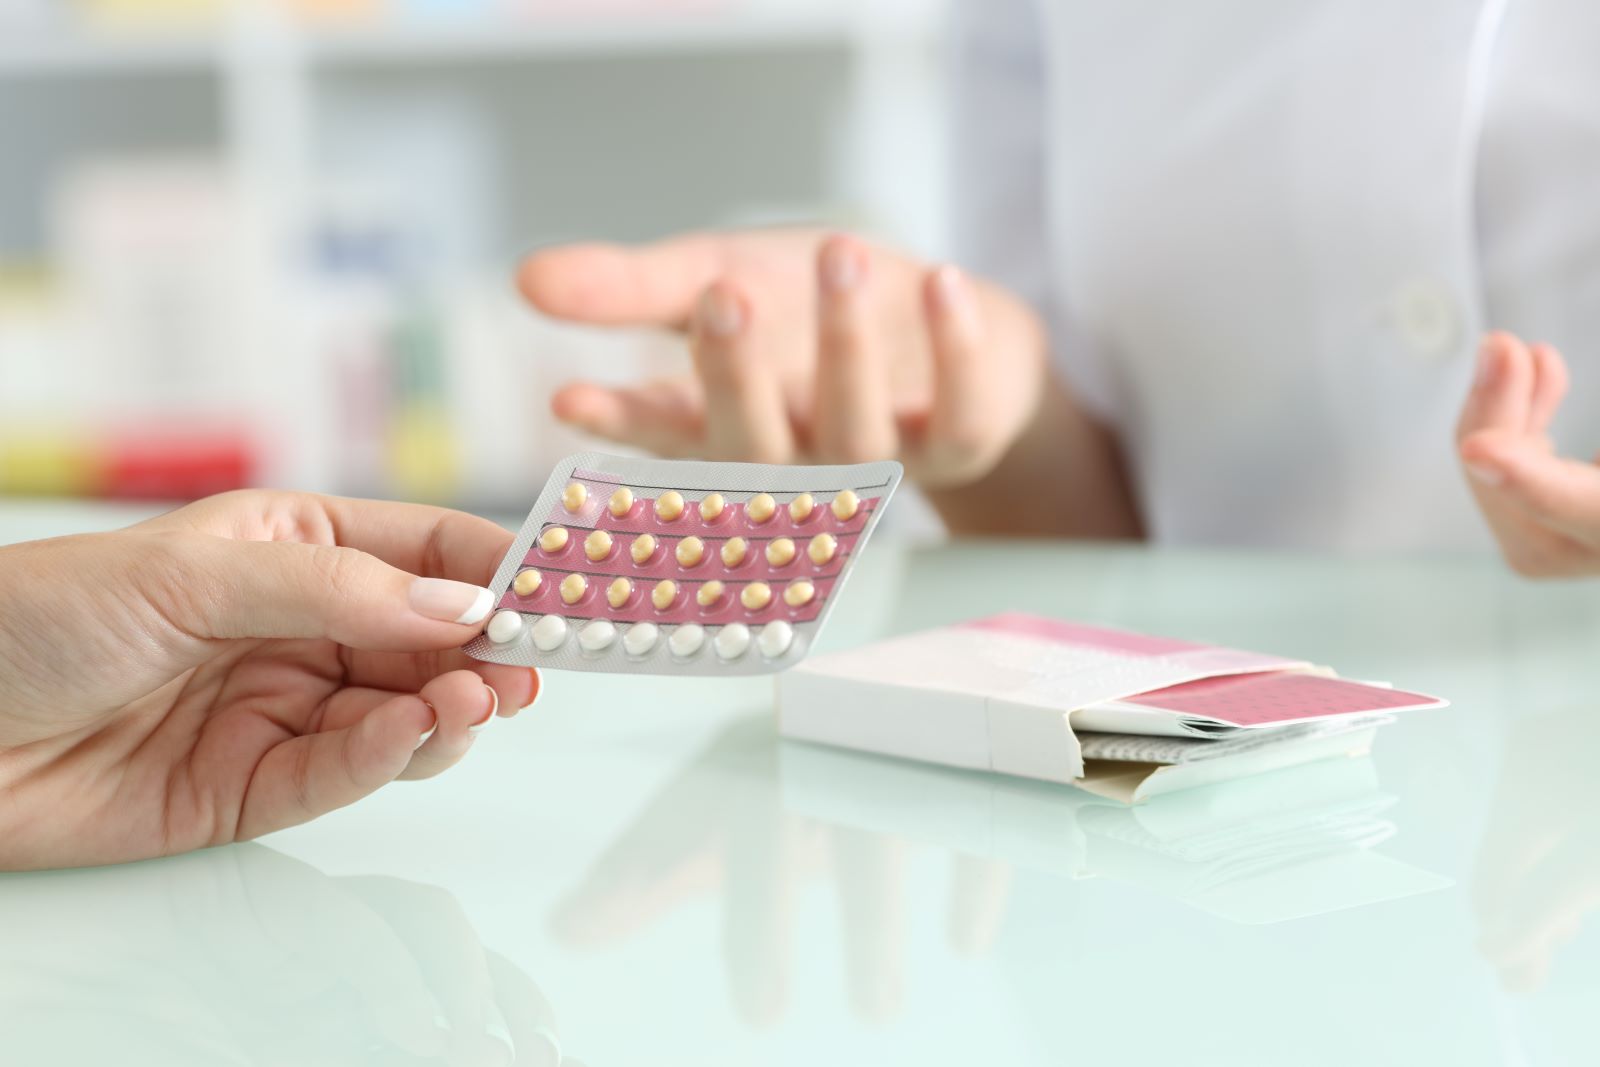 Considering Switching to Hormonal Birth Control? Here's What You Need to Know